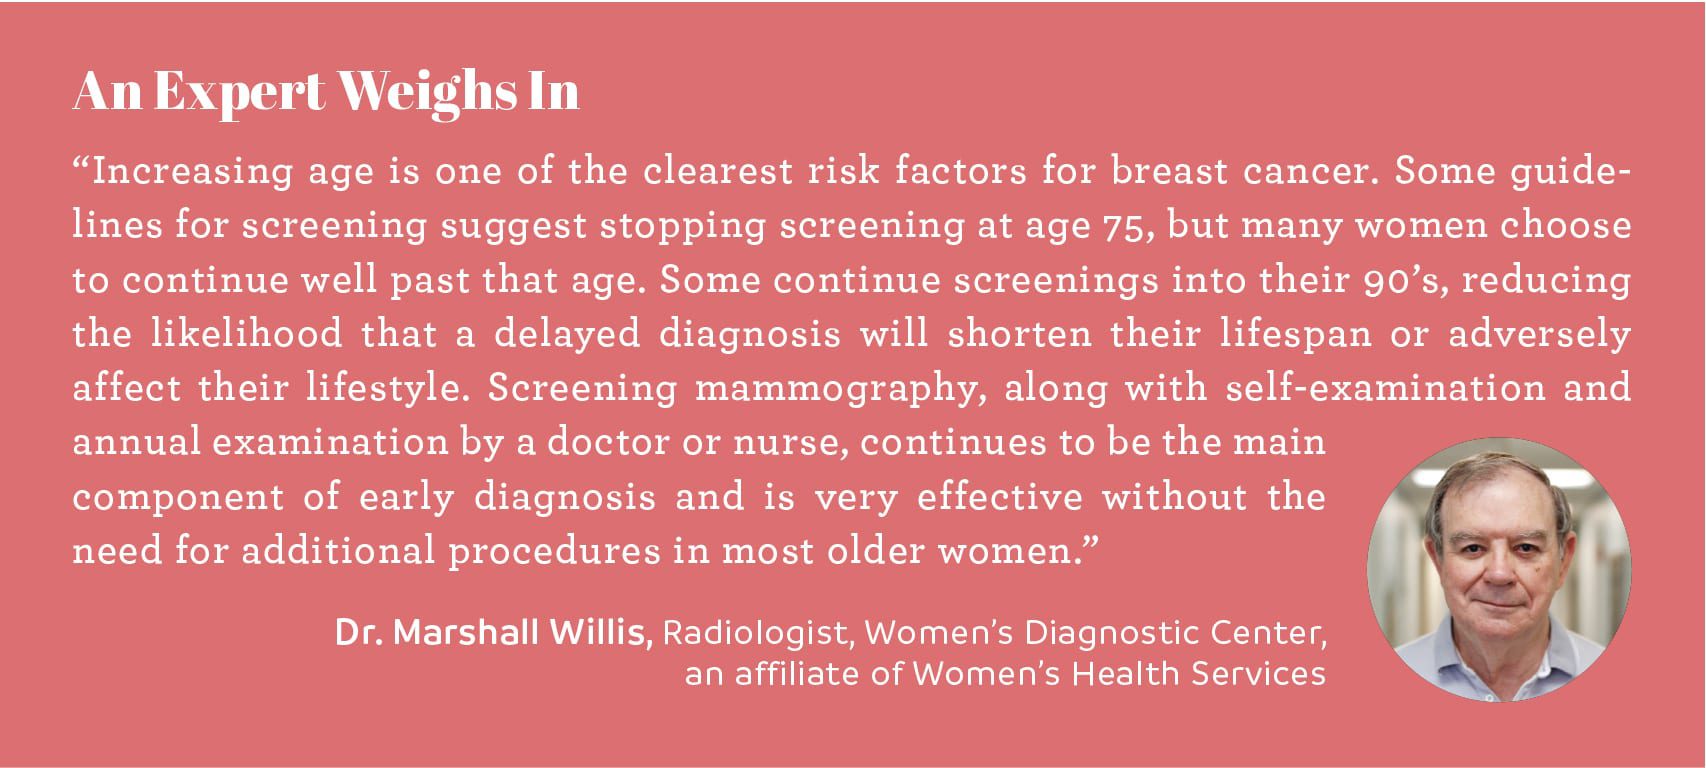 Expert opinion chattanooga doctor marshall willis radiologist women's diagnostic center an affiliate of women's health services